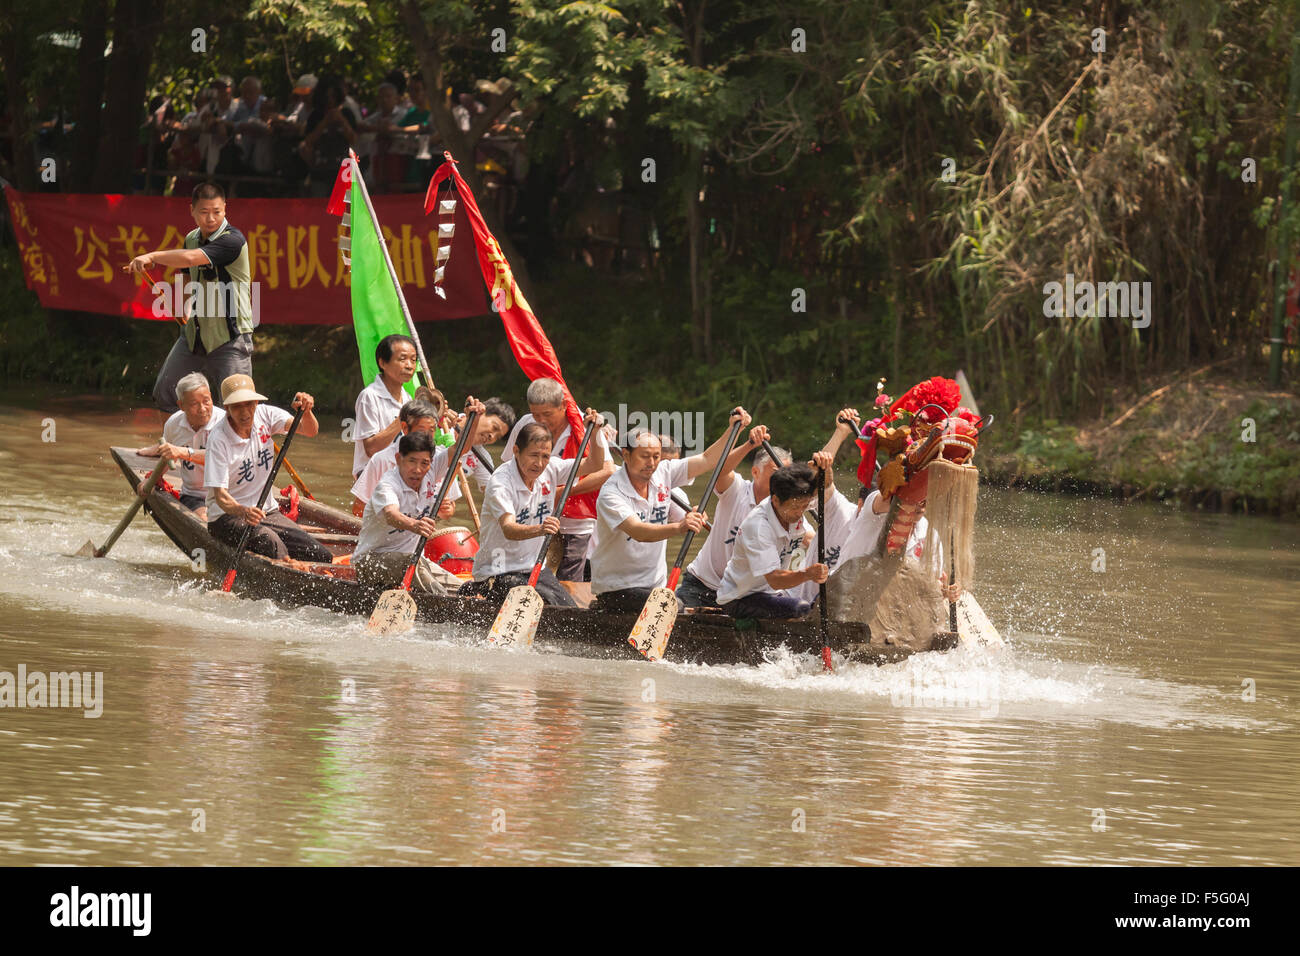 Dragon boat race in Xixi Wetland Park, Hangzhou, China during Dragon Boat Festival celebrations on June 20th 2015. Stock Photo